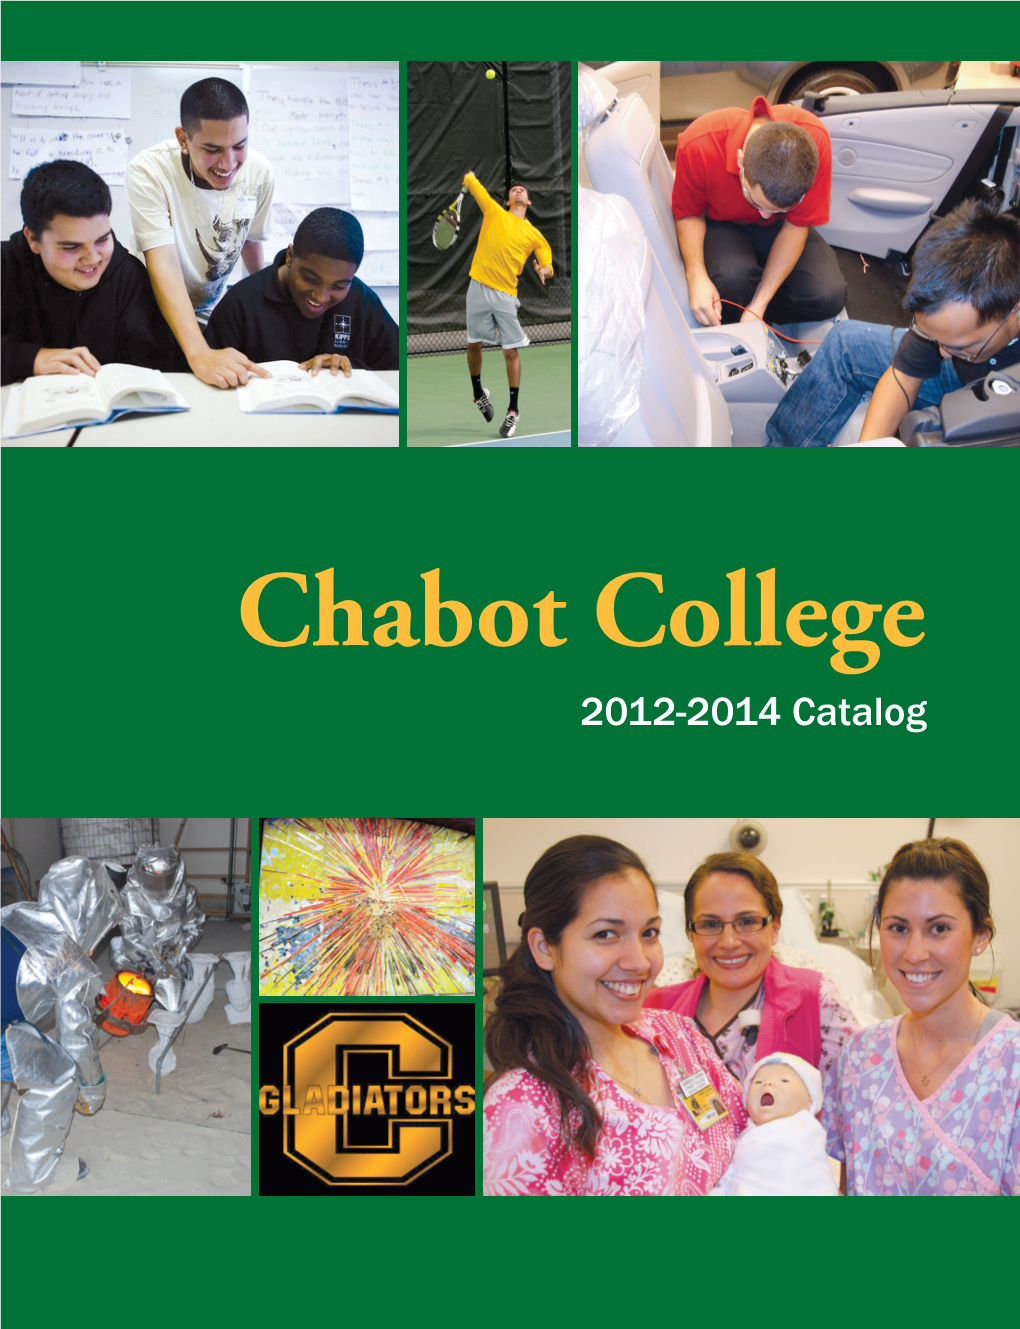 2012-2014 Catalog Thanks to David Steffes for Many of the Photos Used on the Cover